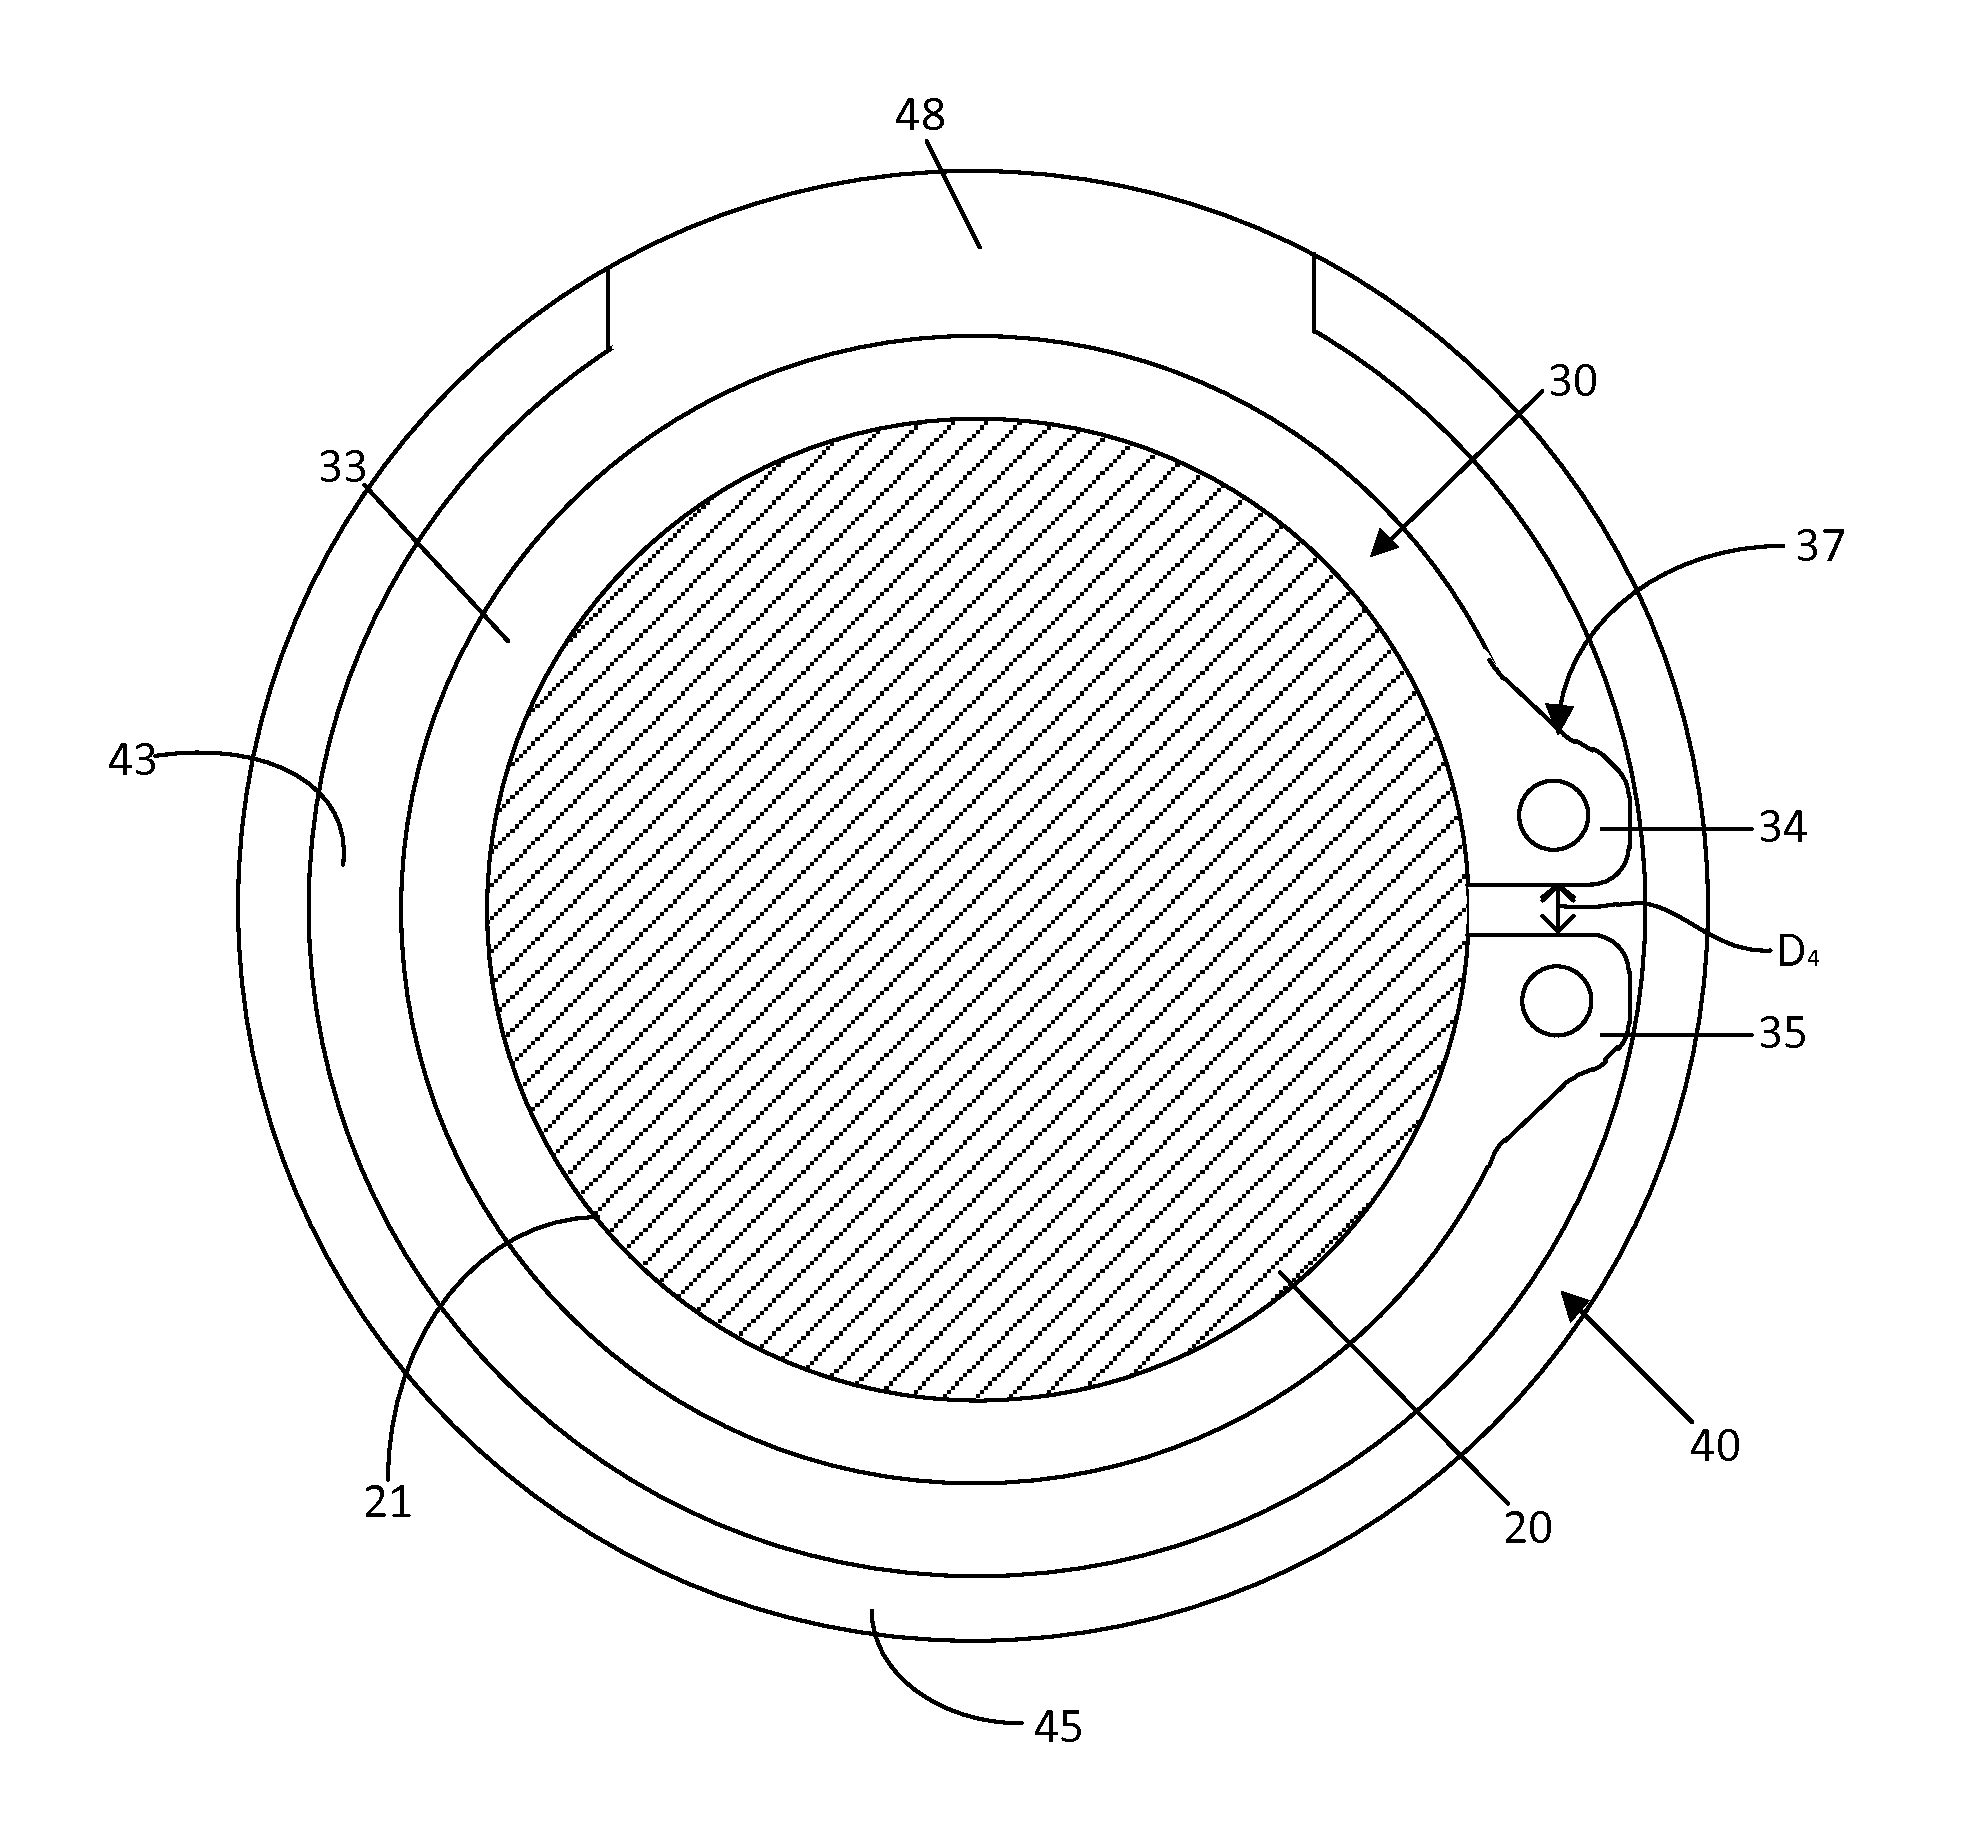 Retaining ring retention system and method